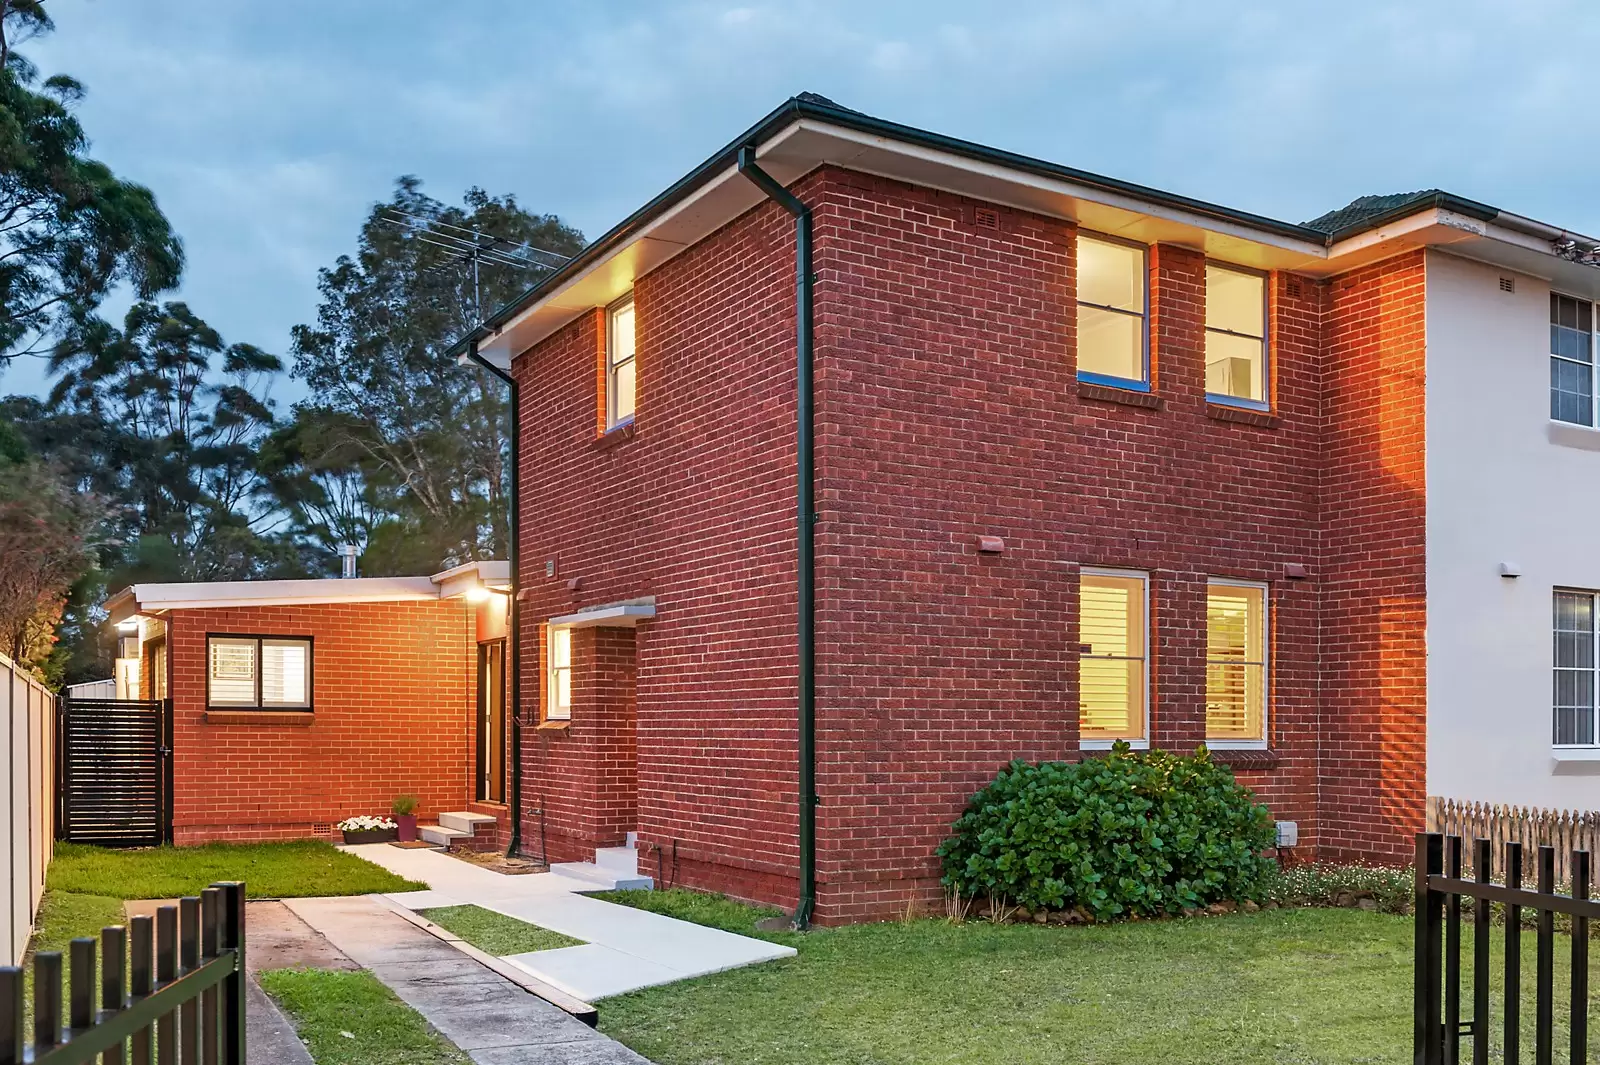 Photo #7: 6 Kenny Avenue, Chifley - Sold by Sydney Sotheby's International Realty